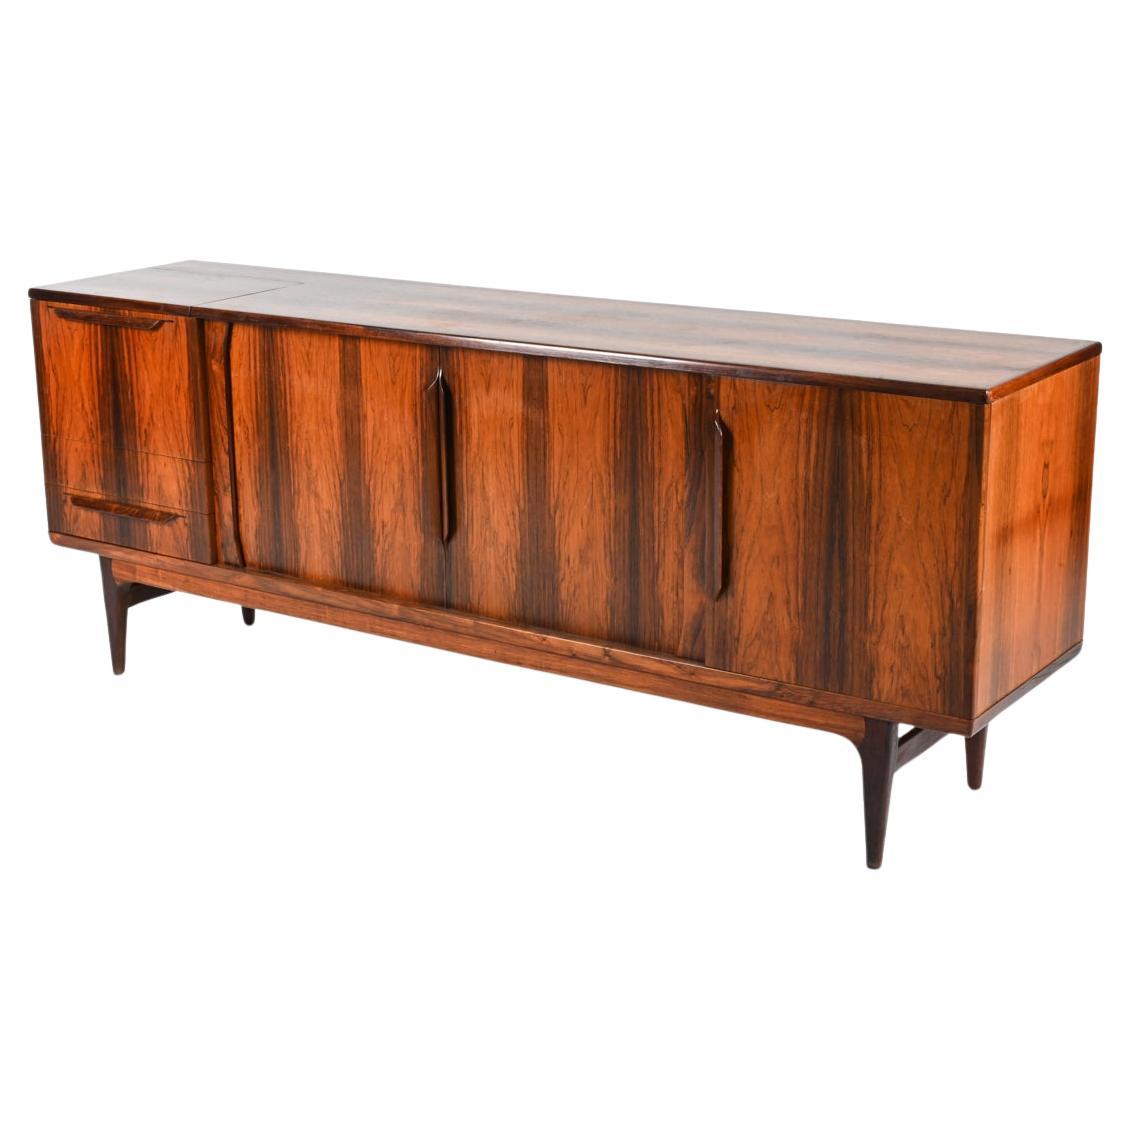 Rare Rosewood Sideboard With Bar by Johannes Andersen; Denmark, c. 1960's